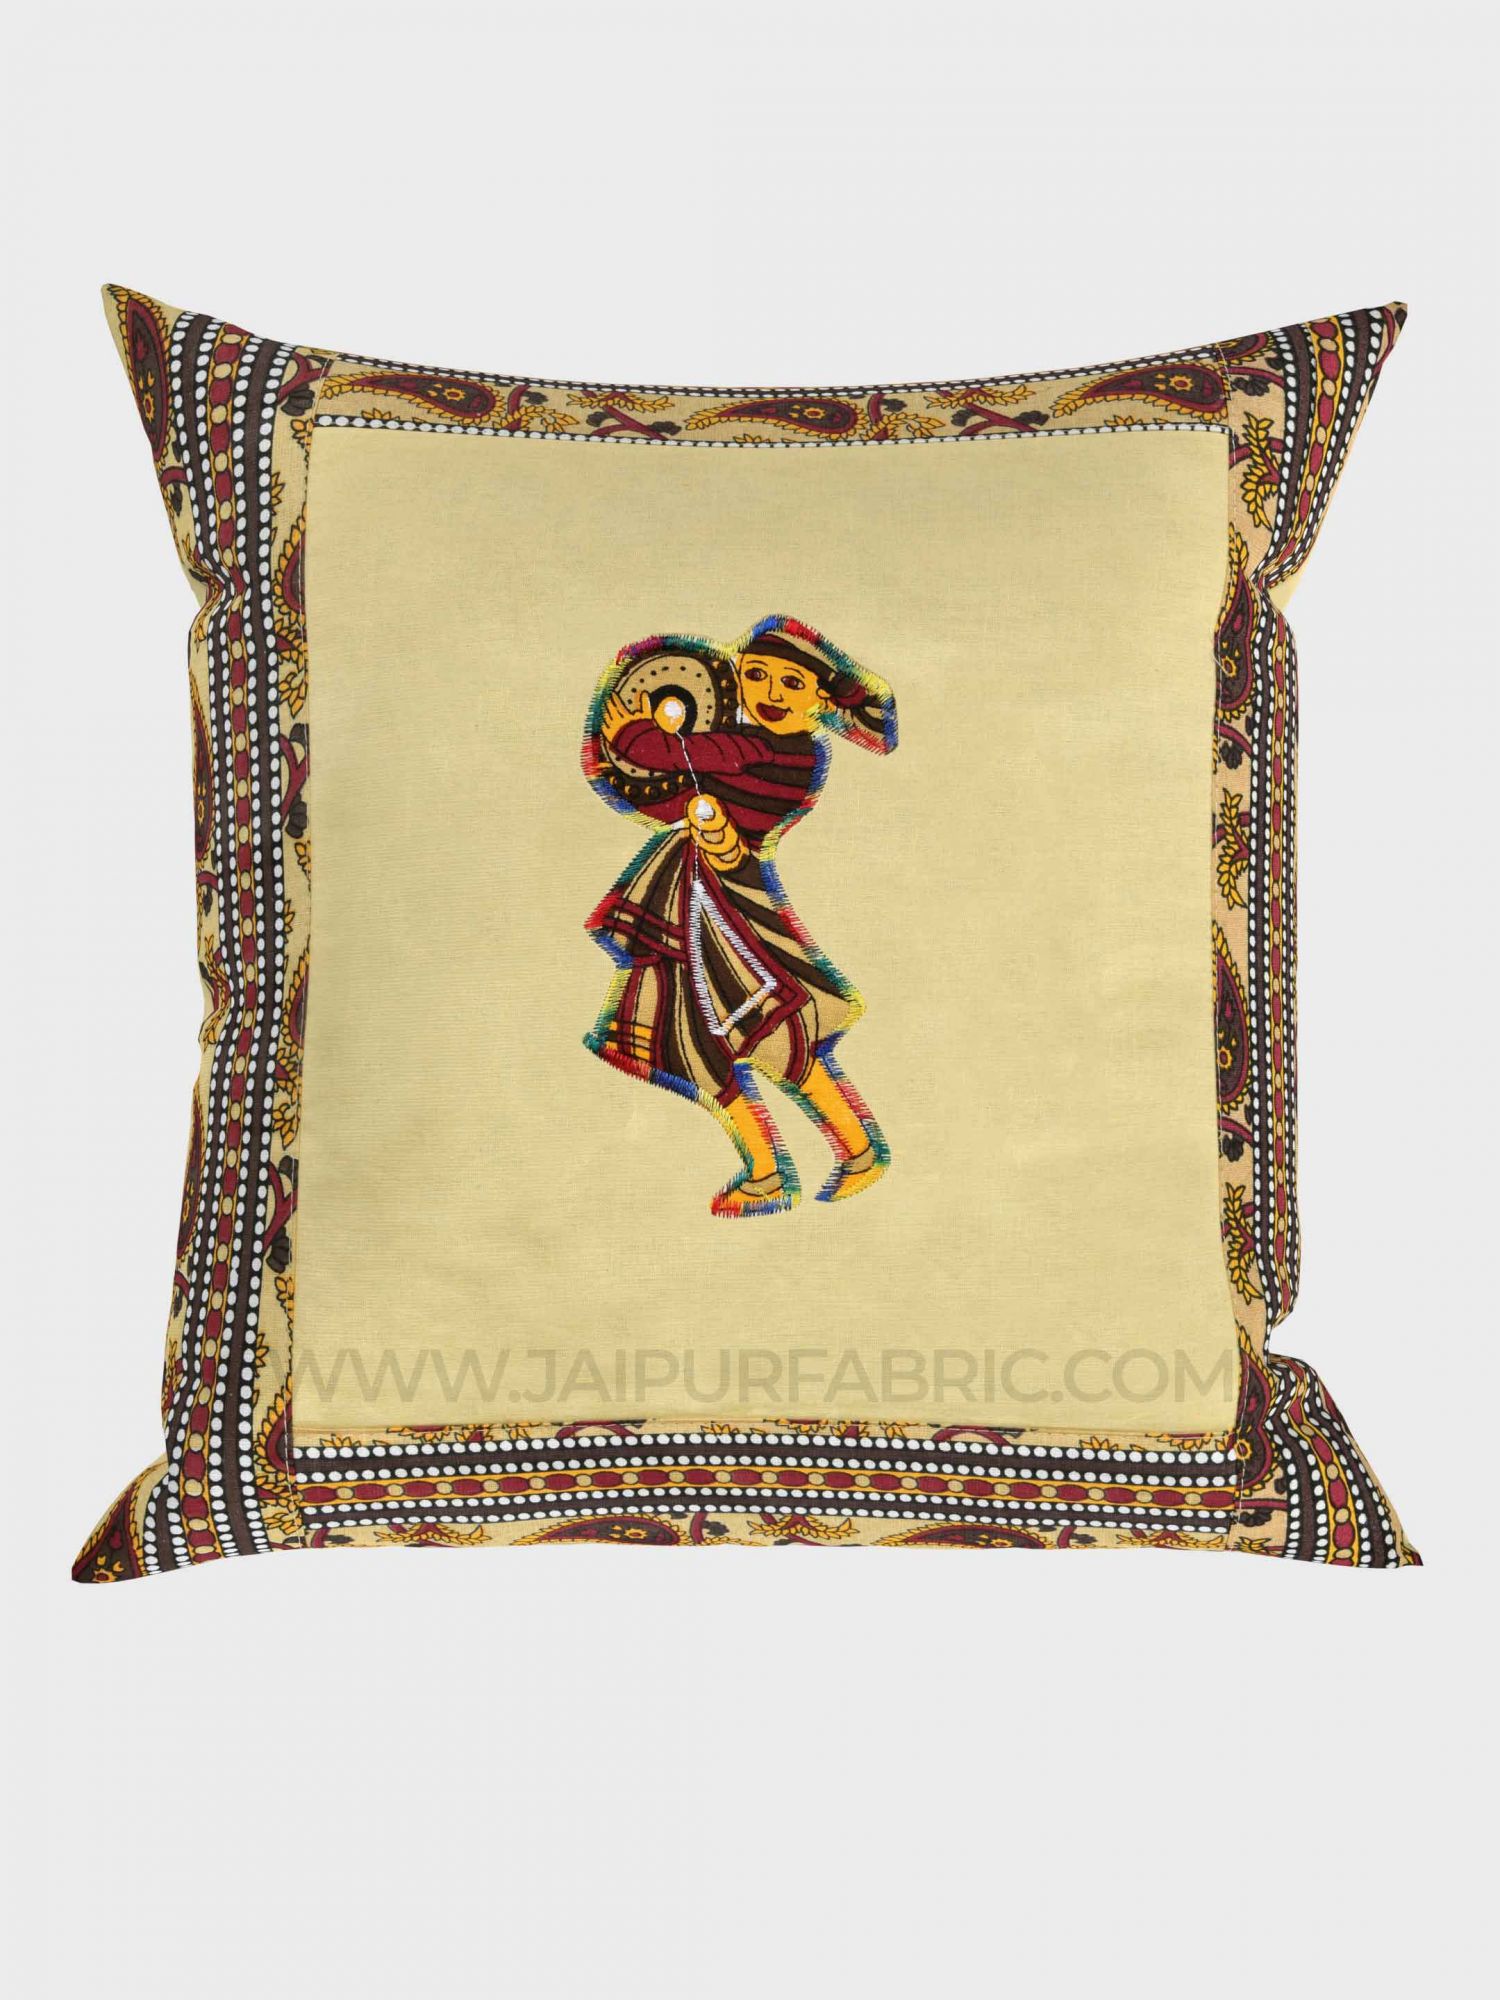 Applique Cream Chang Dance Jaipuri Hand Made Embroidery Patch Work Cushion Cover